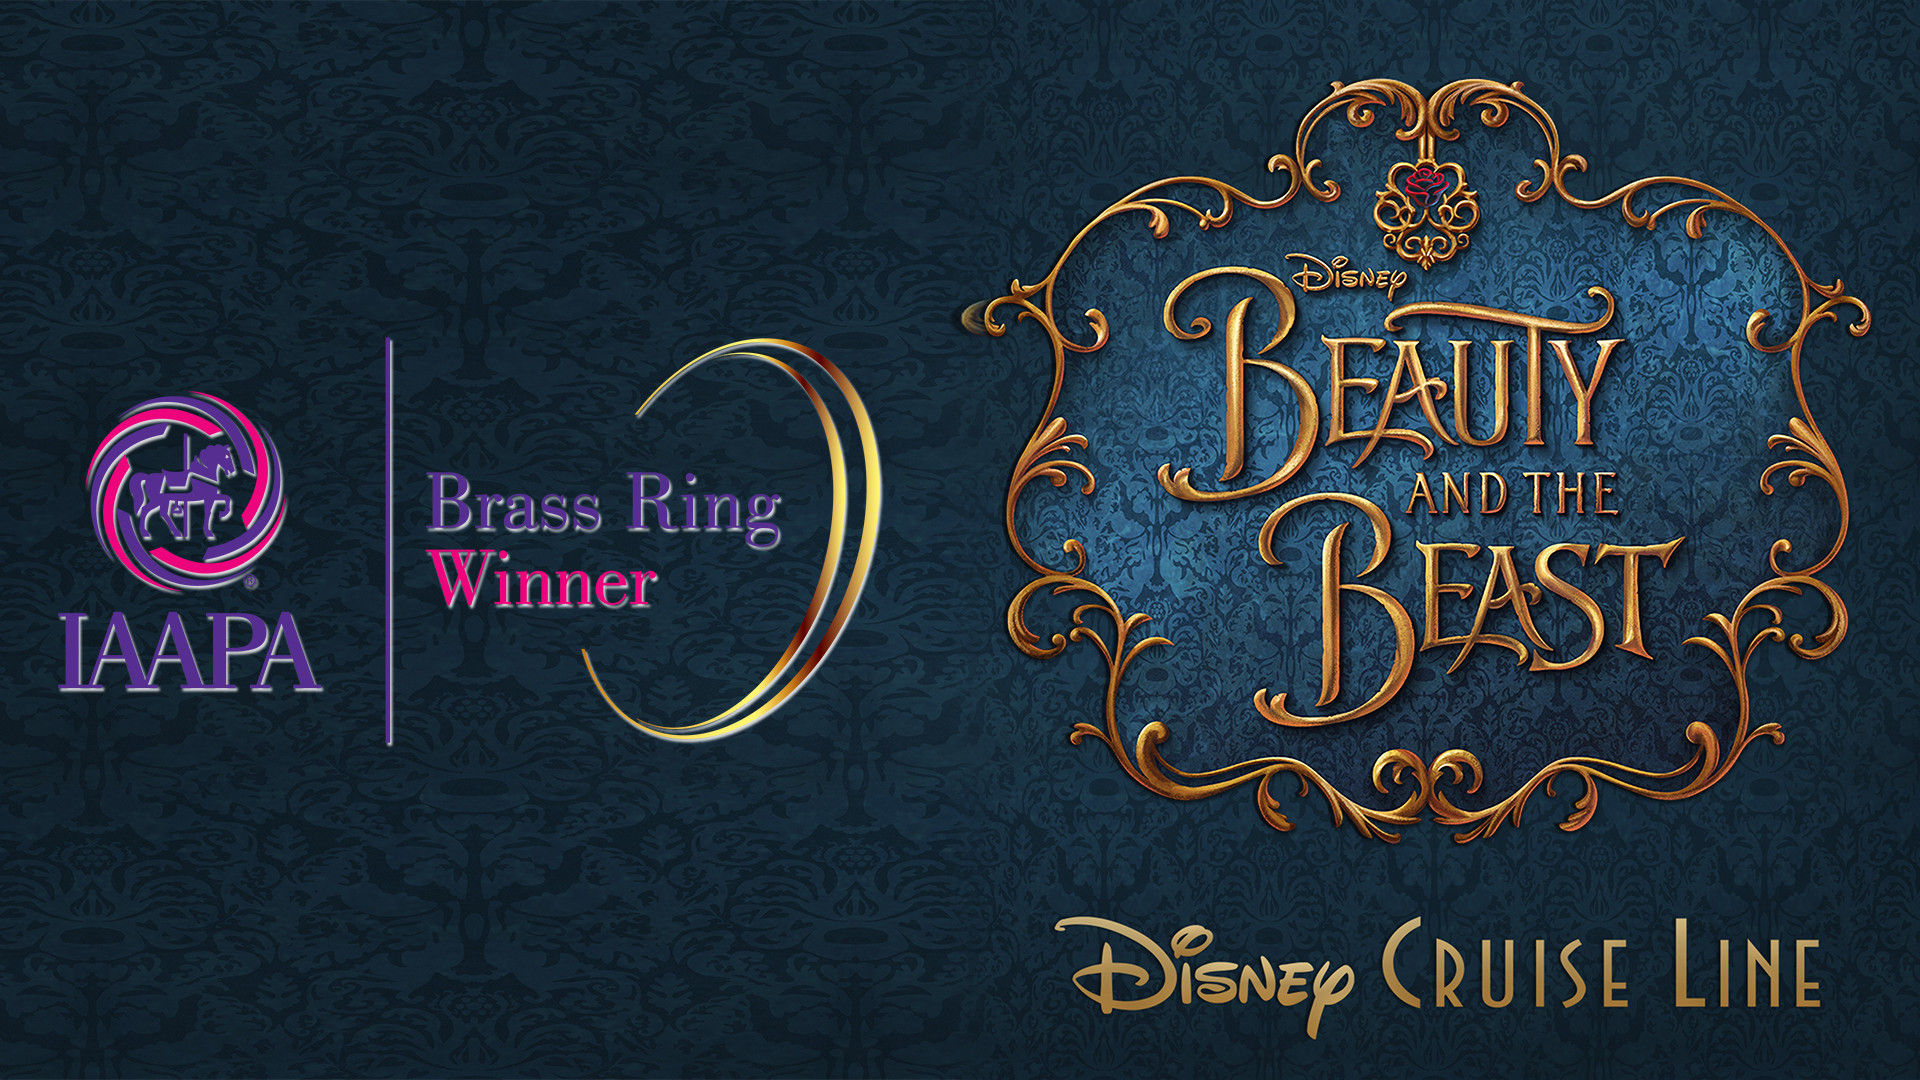 1920x1080 IAAPA Awards Disney Parks Live Entertainment a Brass Ring Award for Disney  Cruise Line's Beauty and the Beast